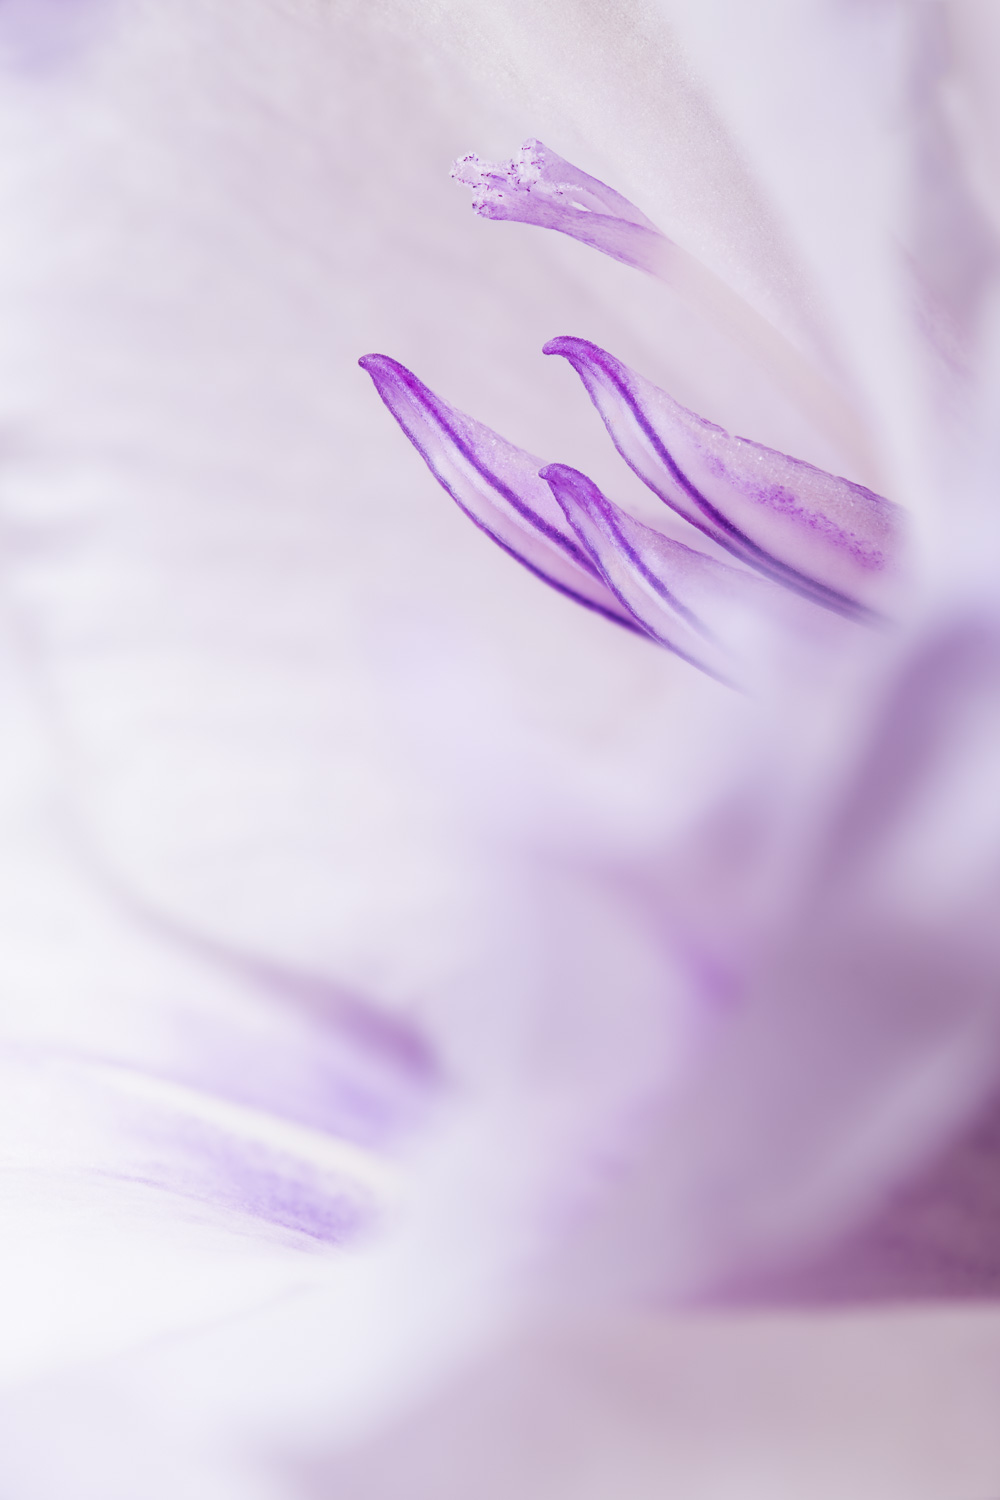 Selective focus macro photograph of the pistil and stamens of a gladiolus flower. Image #2210